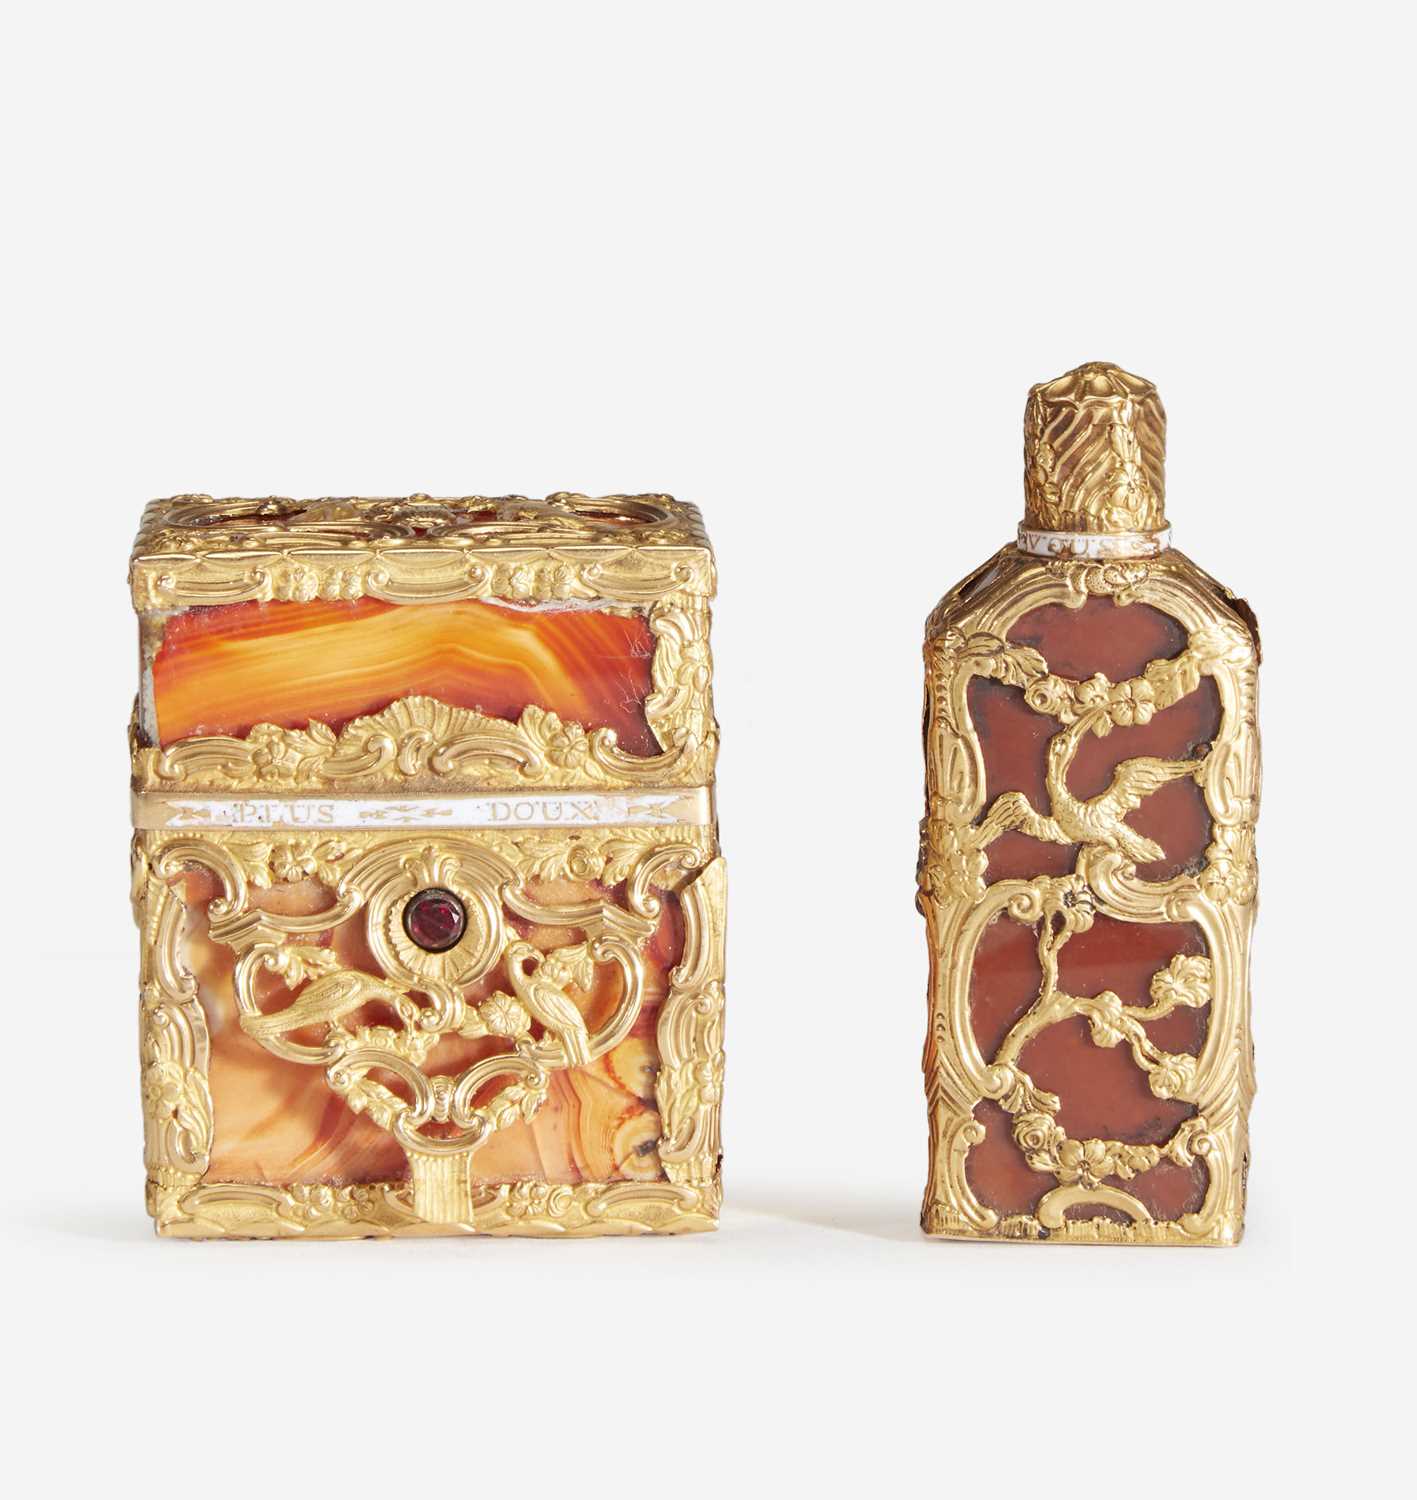 Lot 22 - A George III gold-mounted hardstone necessaire and perfume